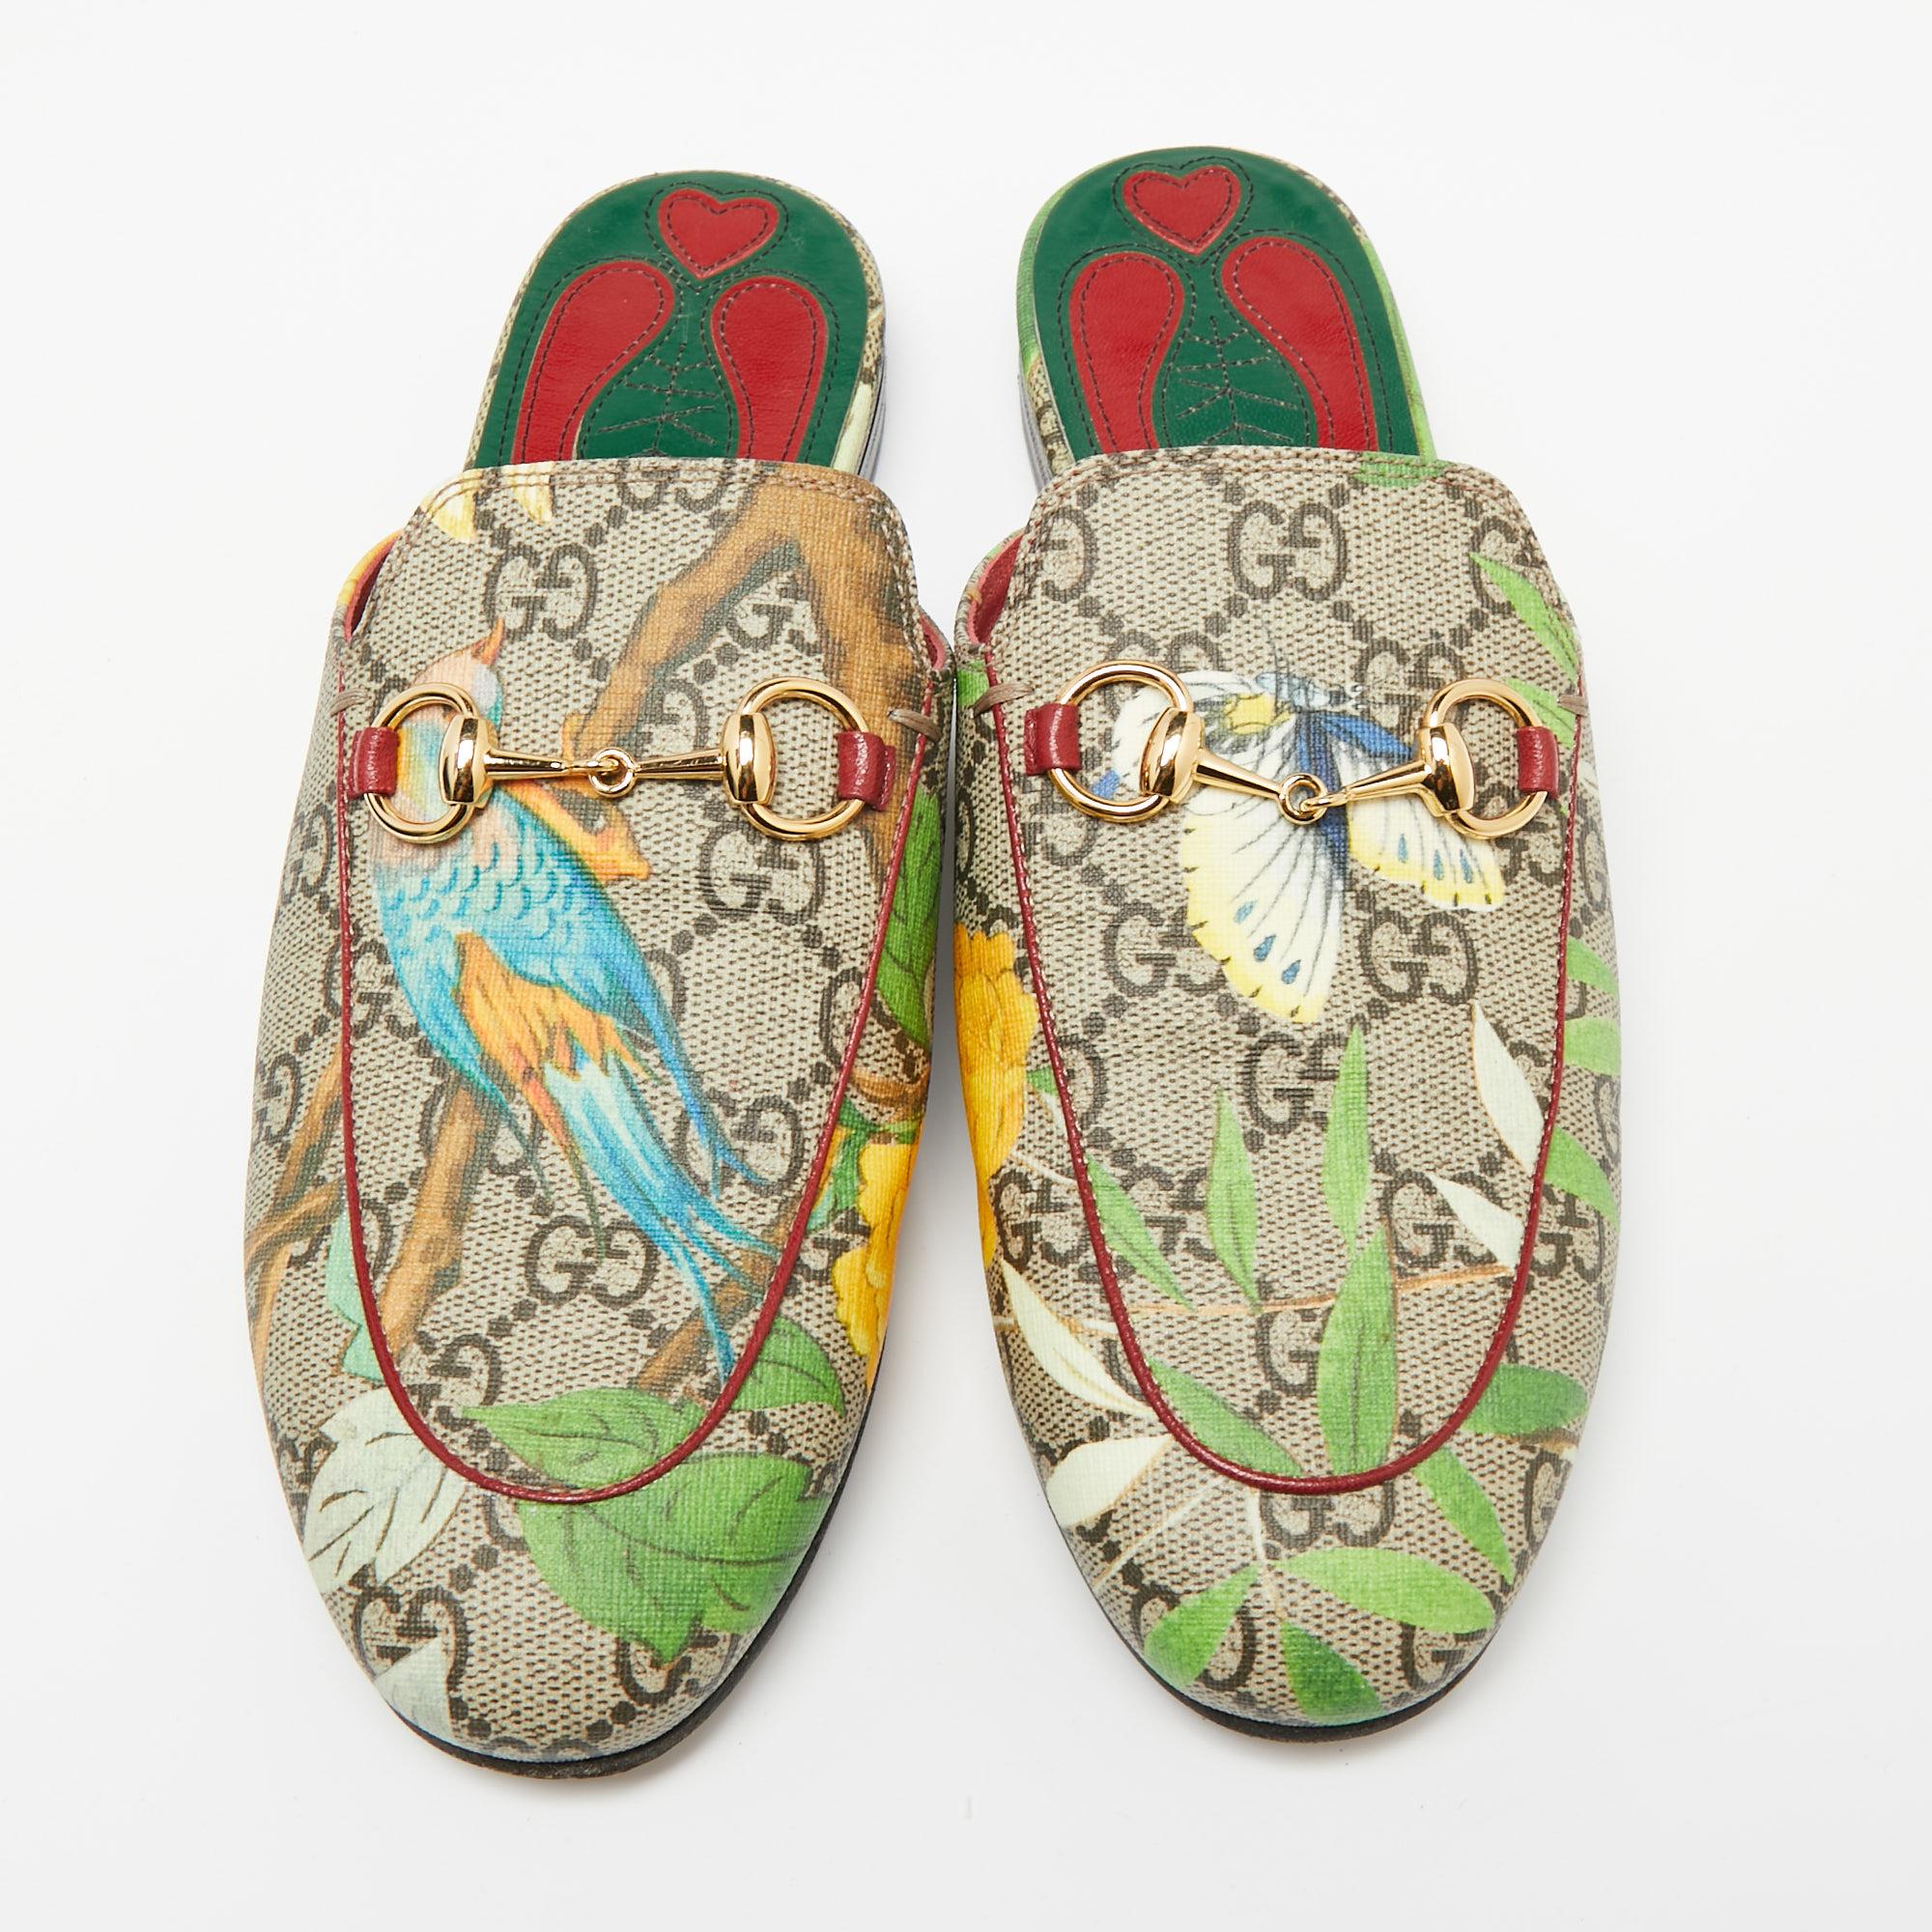 First introduced as part of Gucci's Fall Winter 2015 collection, the Princetown mules are an absolute favorite worldwide and have been worn by countless celebrities. These mules have been designed in the signature GG Supreme canvas and detailed with